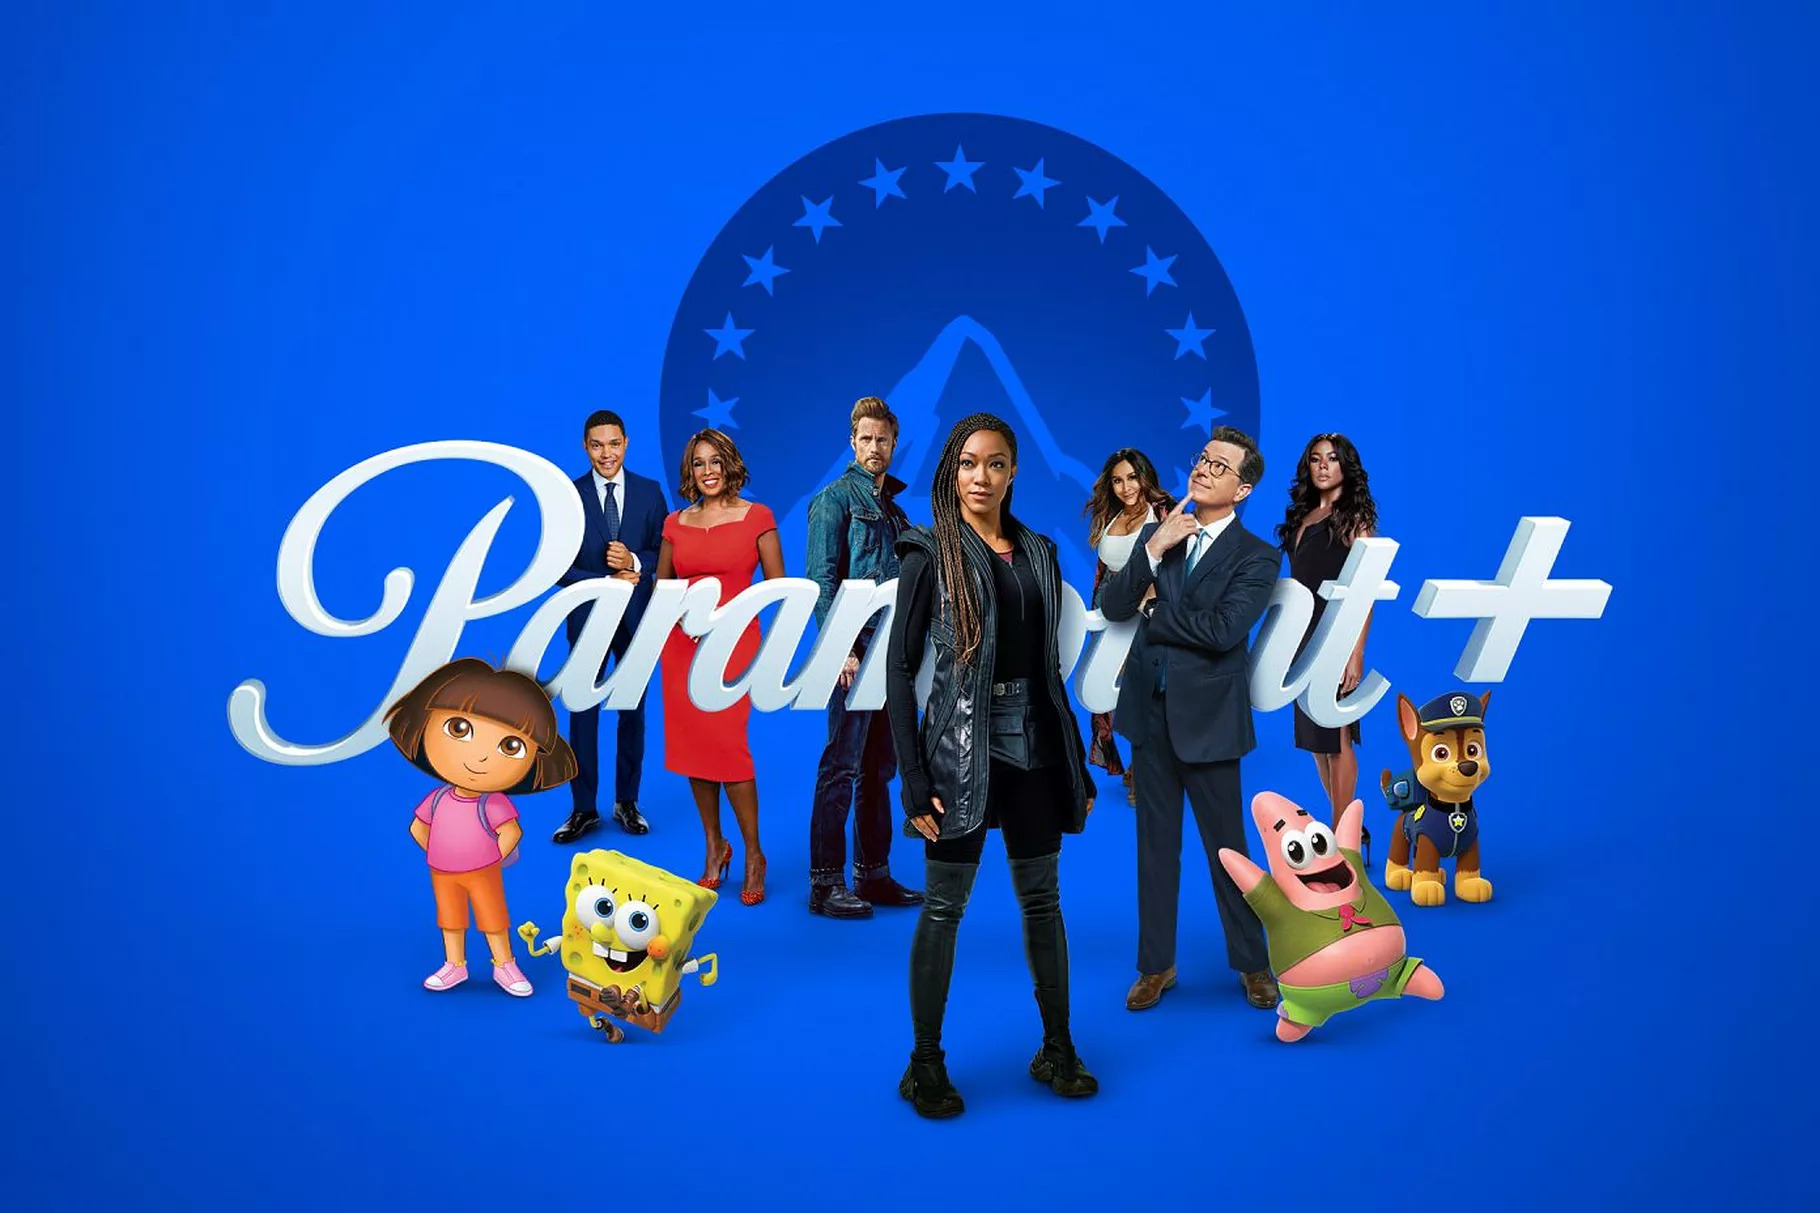 ViacomCBS offers a free year of Paramount+ to US T-Mobile customers - Digital TV Europe